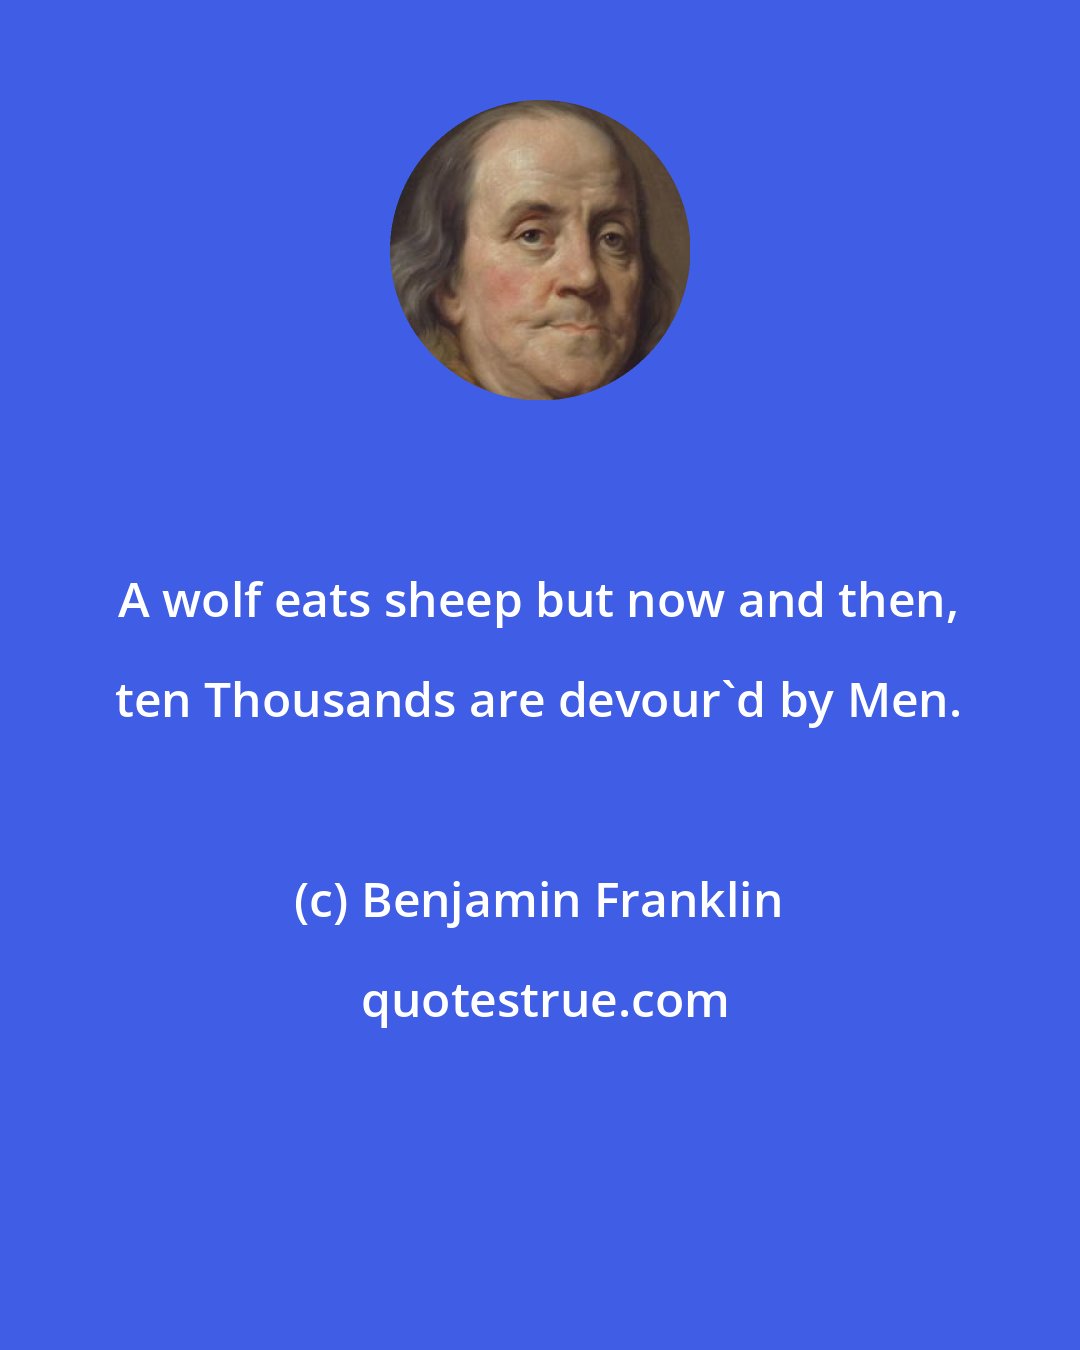 Benjamin Franklin: A wolf eats sheep but now and then, ten Thousands are devour'd by Men.